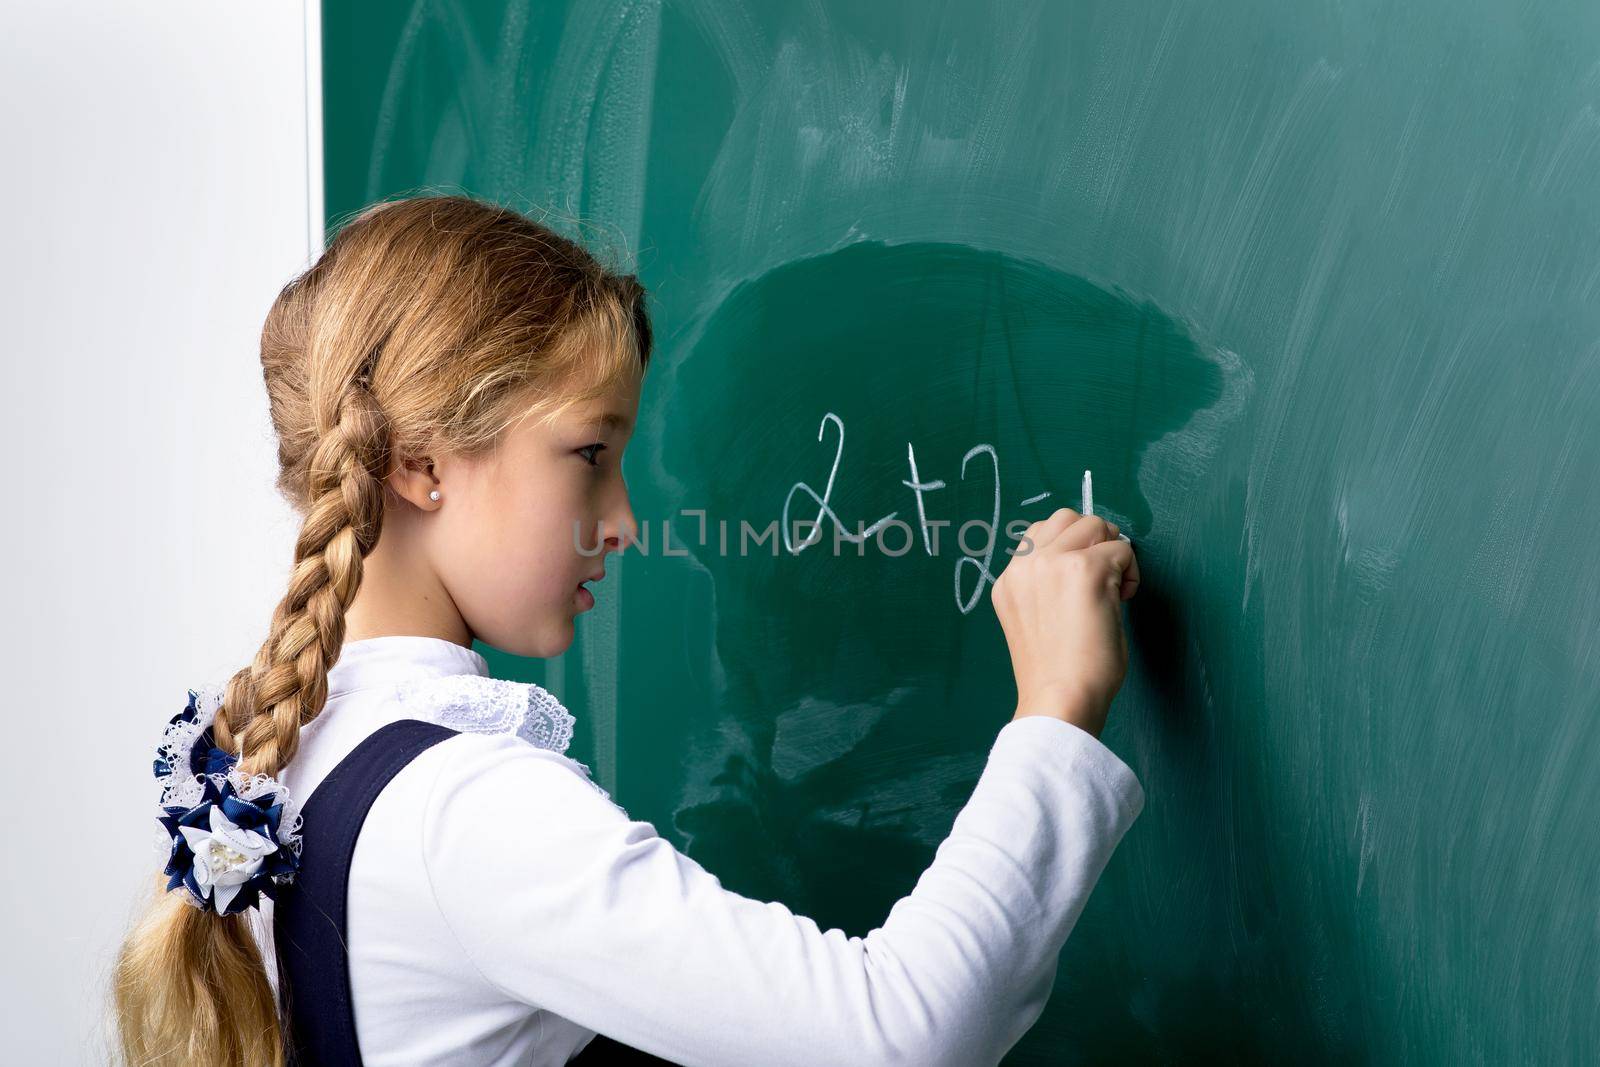 Schoolgirl writing on chalkboard in classroom. Primary school student in uniform standing in front of blackboard and writing using chalk. Back to school, education concept